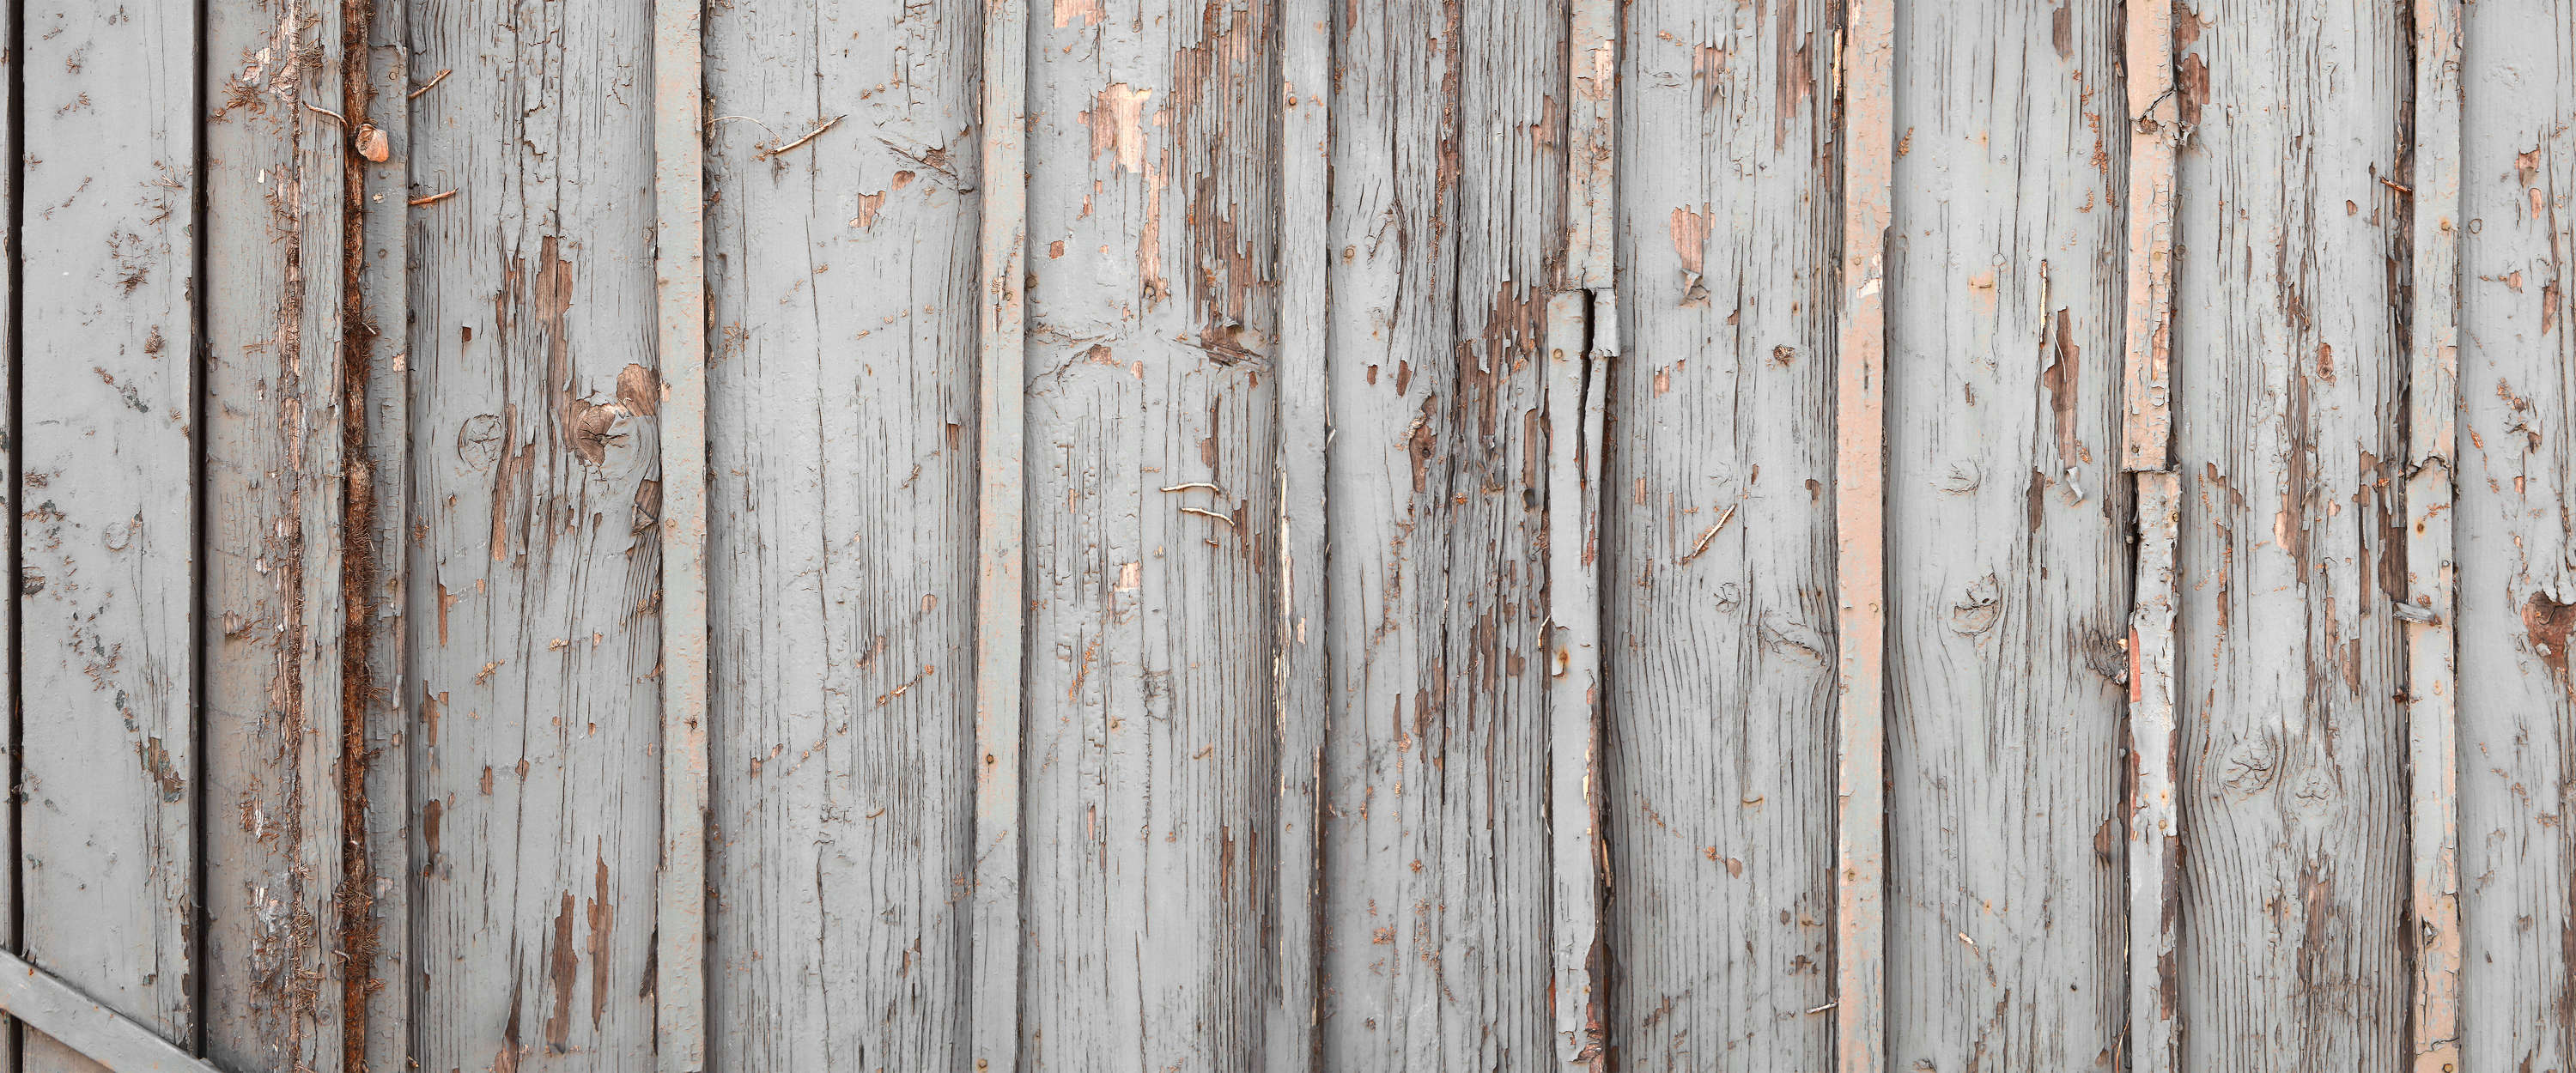             Photo wallpaper wood look shabby chic design with used look
        